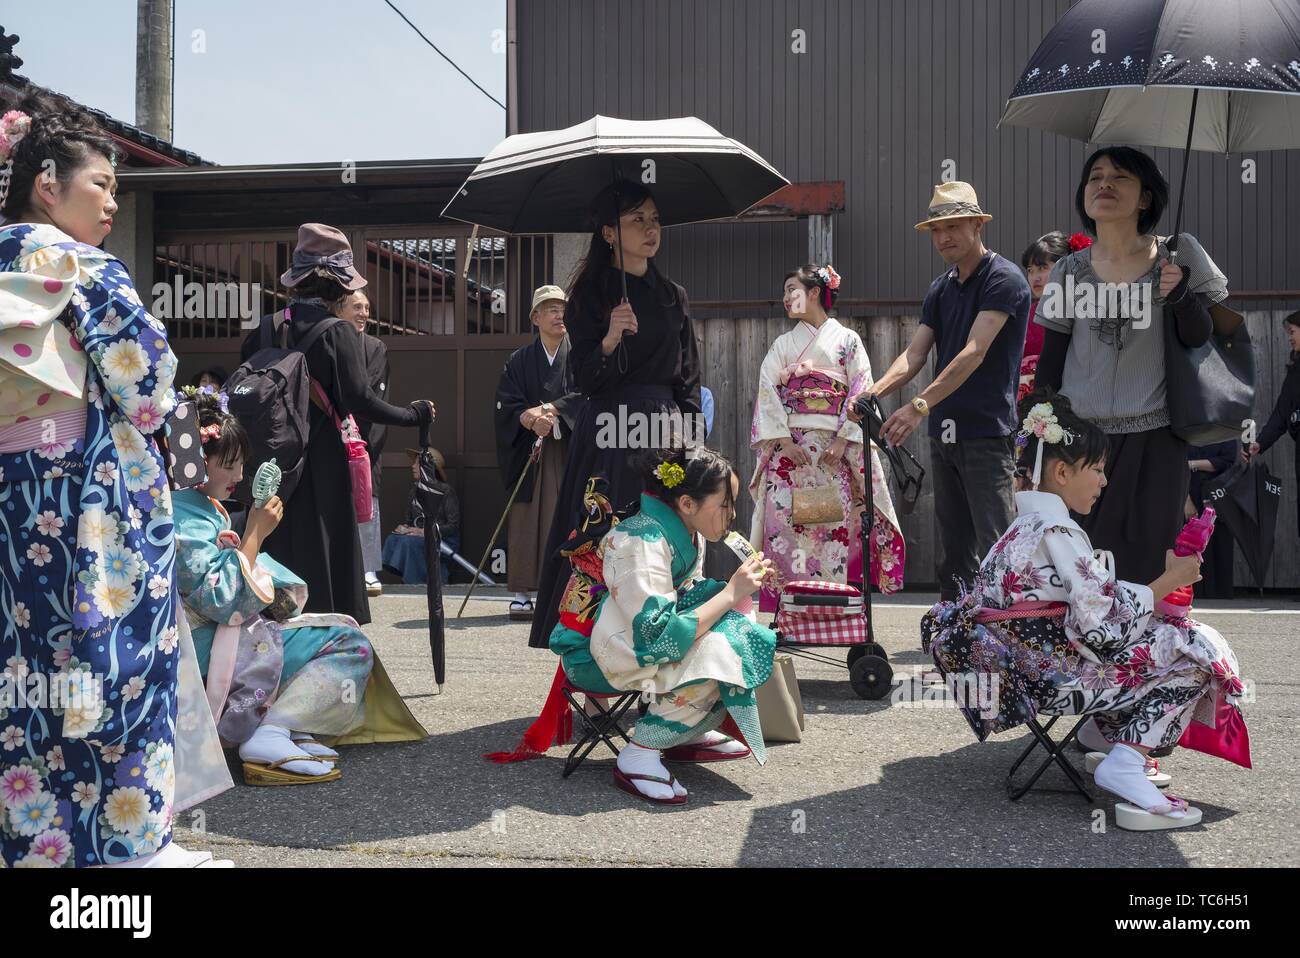 Oyama, Japan. 05th June, 2019. Oyama Inu Matsuri (Dog Festival) June 5th. The festival is based on a 300 year old legend that takes place in the 1500 year old Sugio Jinja Shrine in Oyama. Legend has it that the shrine was tormented by demons who demanded the sacrifice of a young girl every year. The villagers complied to avoid famine and torment. A simple dog named Mekke Inu finally killed all the demons, but in the process became mortally wounded and died. The festival commemorates the heroic dog with a parade around the town ending at the shrine. Credit: ZUMA Press, Inc./Alamy Live News Stock Photo